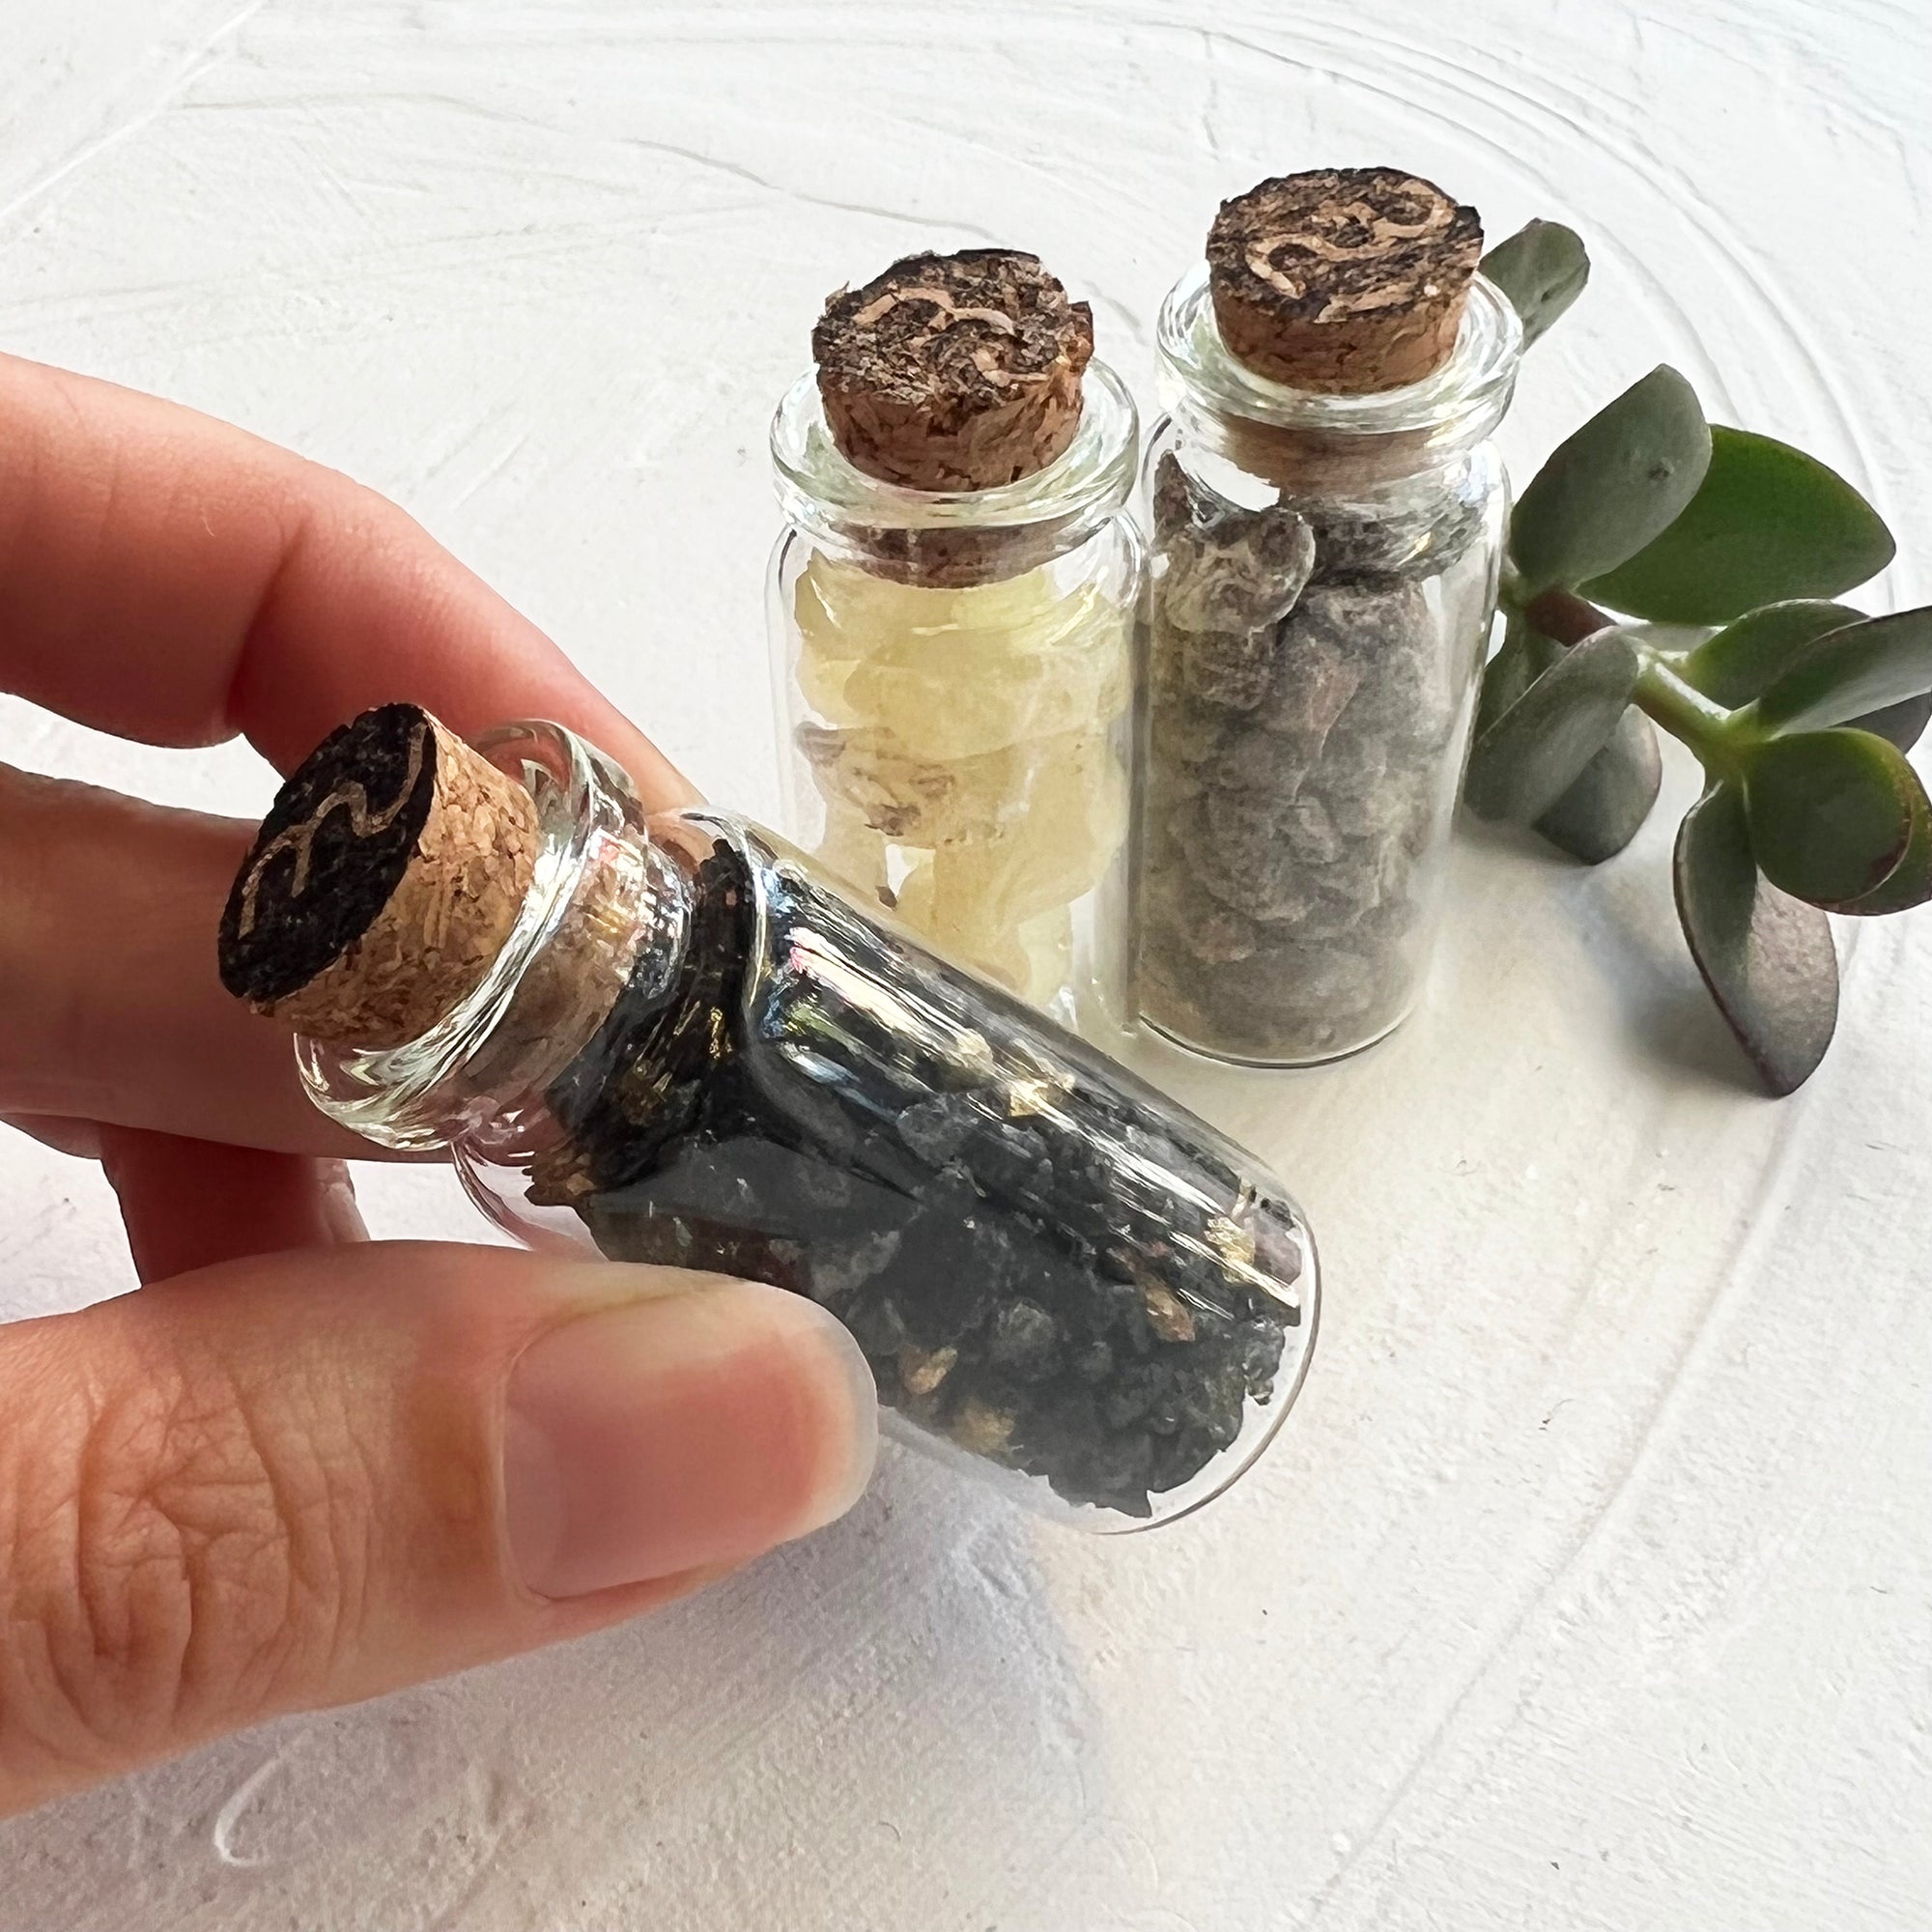 Iron and Copper Resin Incense or Fragrance Oil Burning Kit